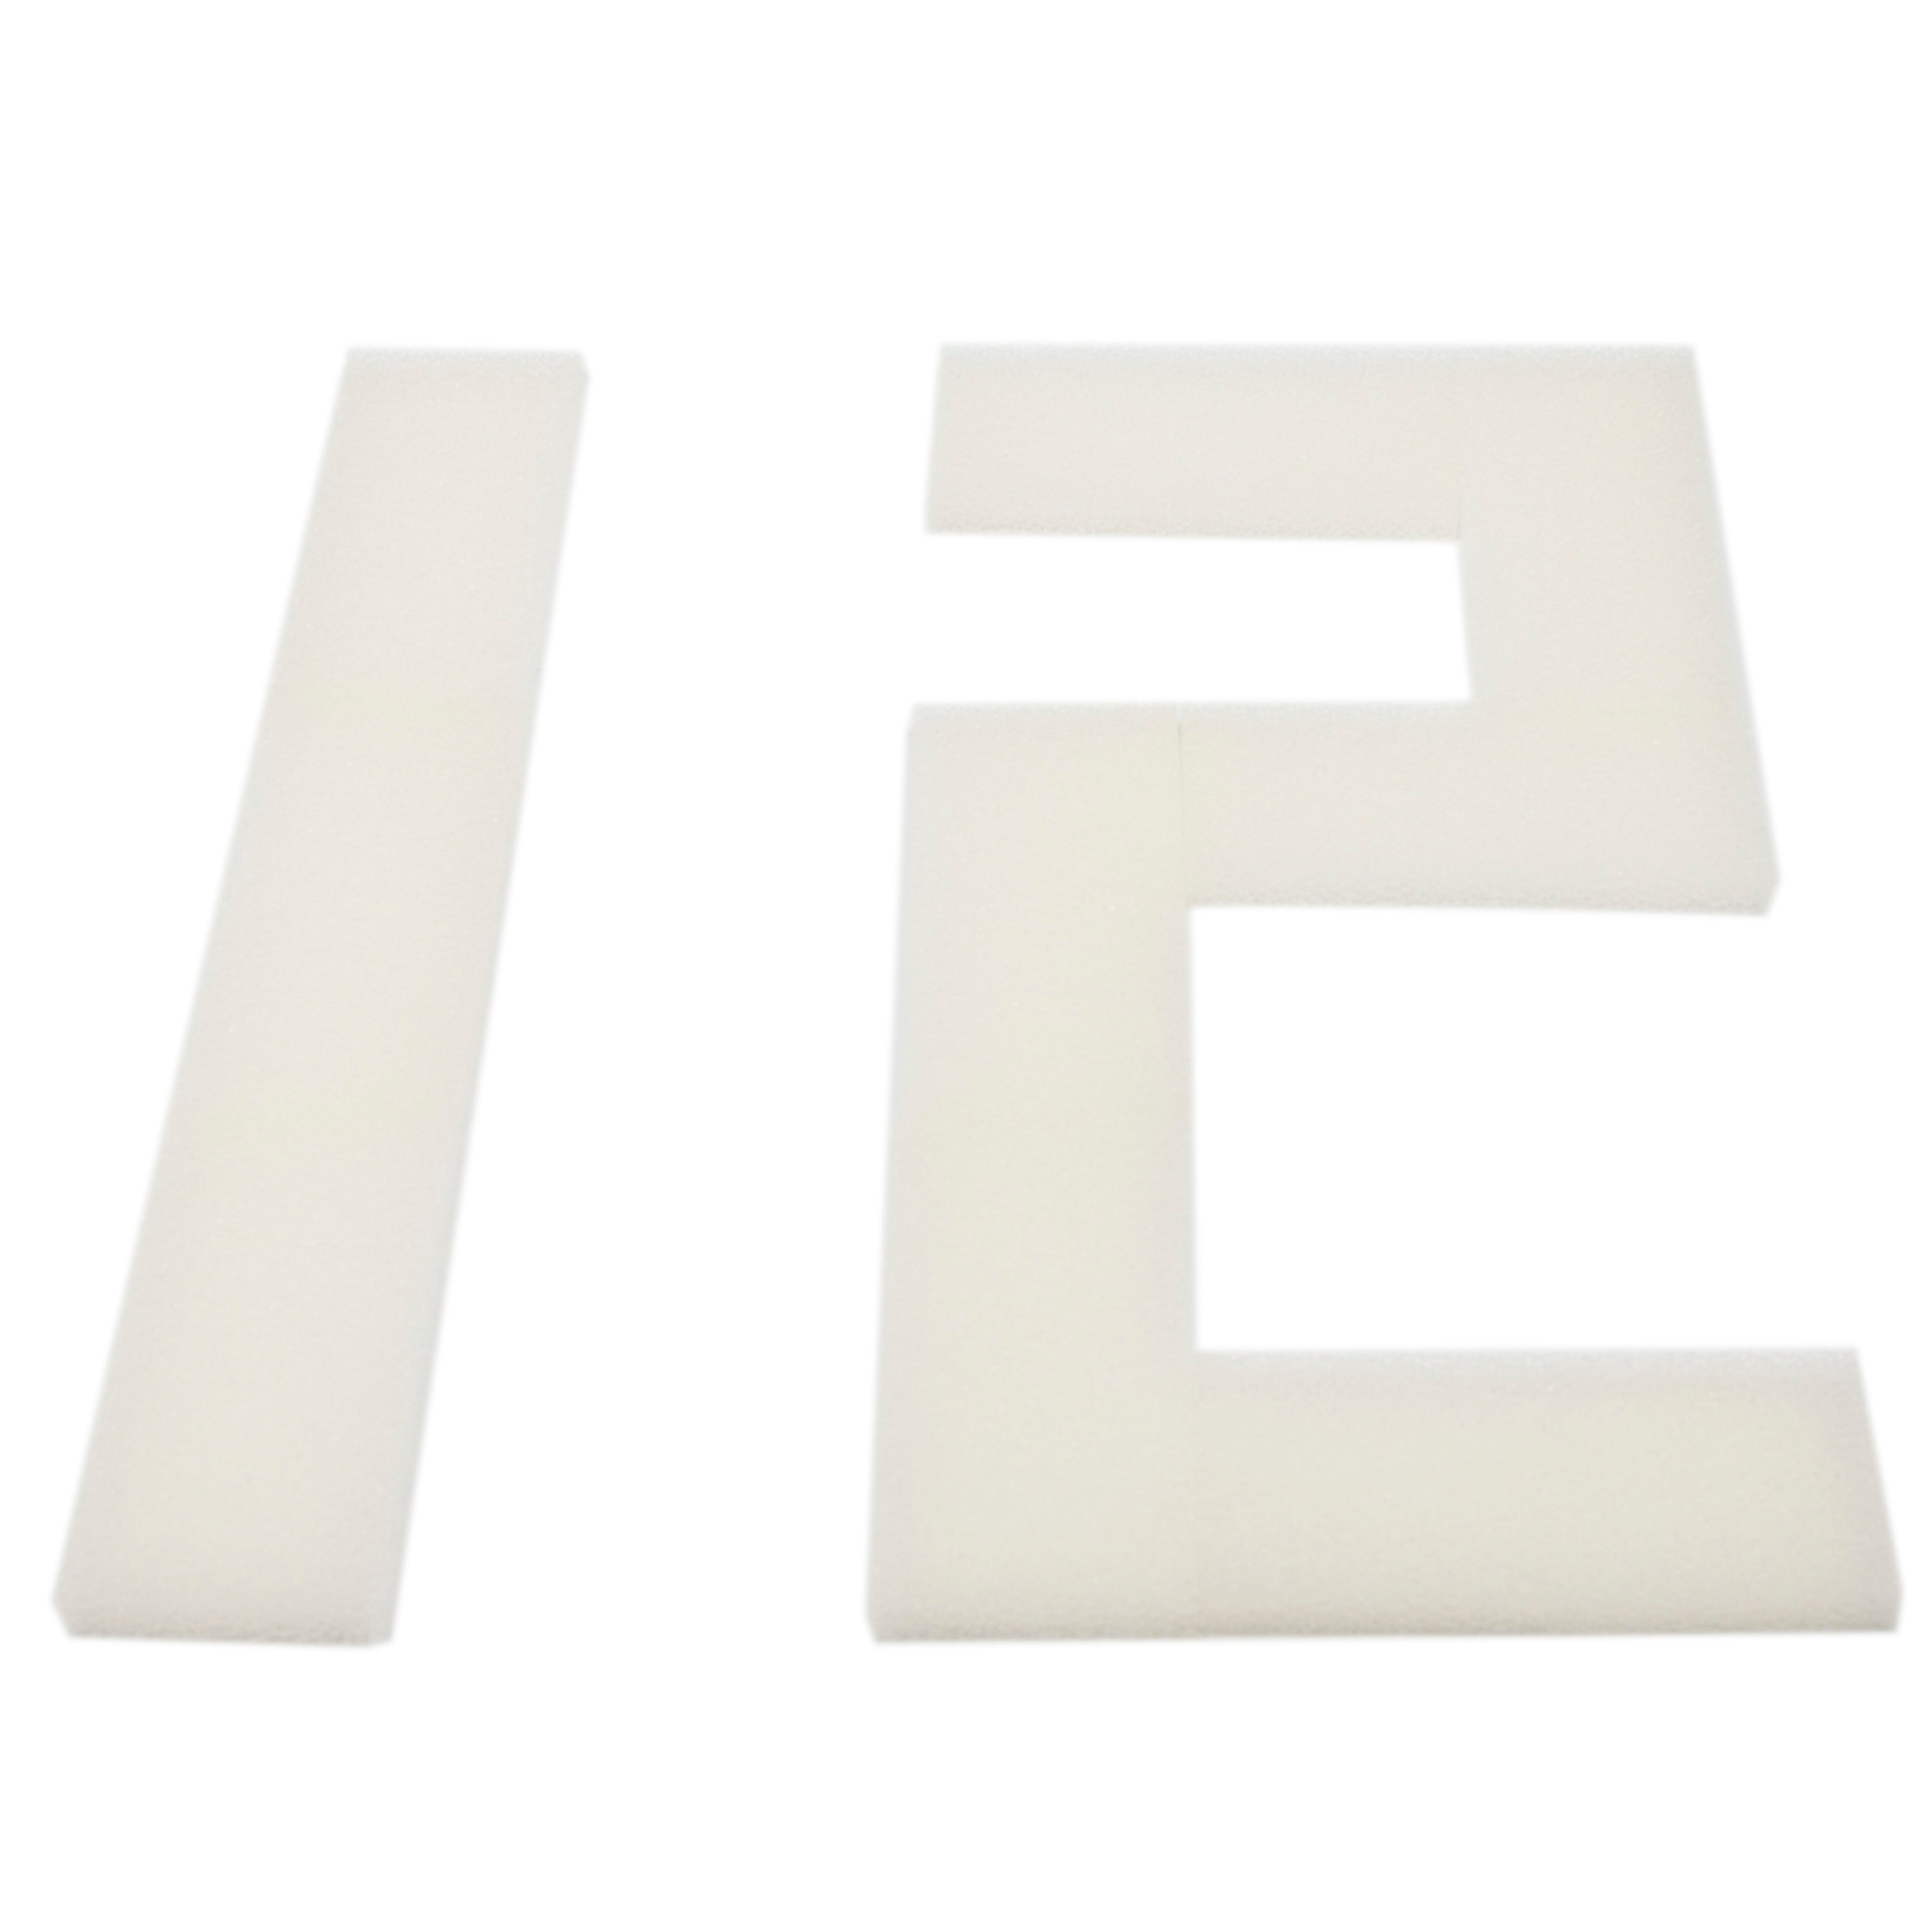 LTWHOME Compatible Foam Filters Non-Branded But Suitable For Fluval U2 Filter (Pack of 12)